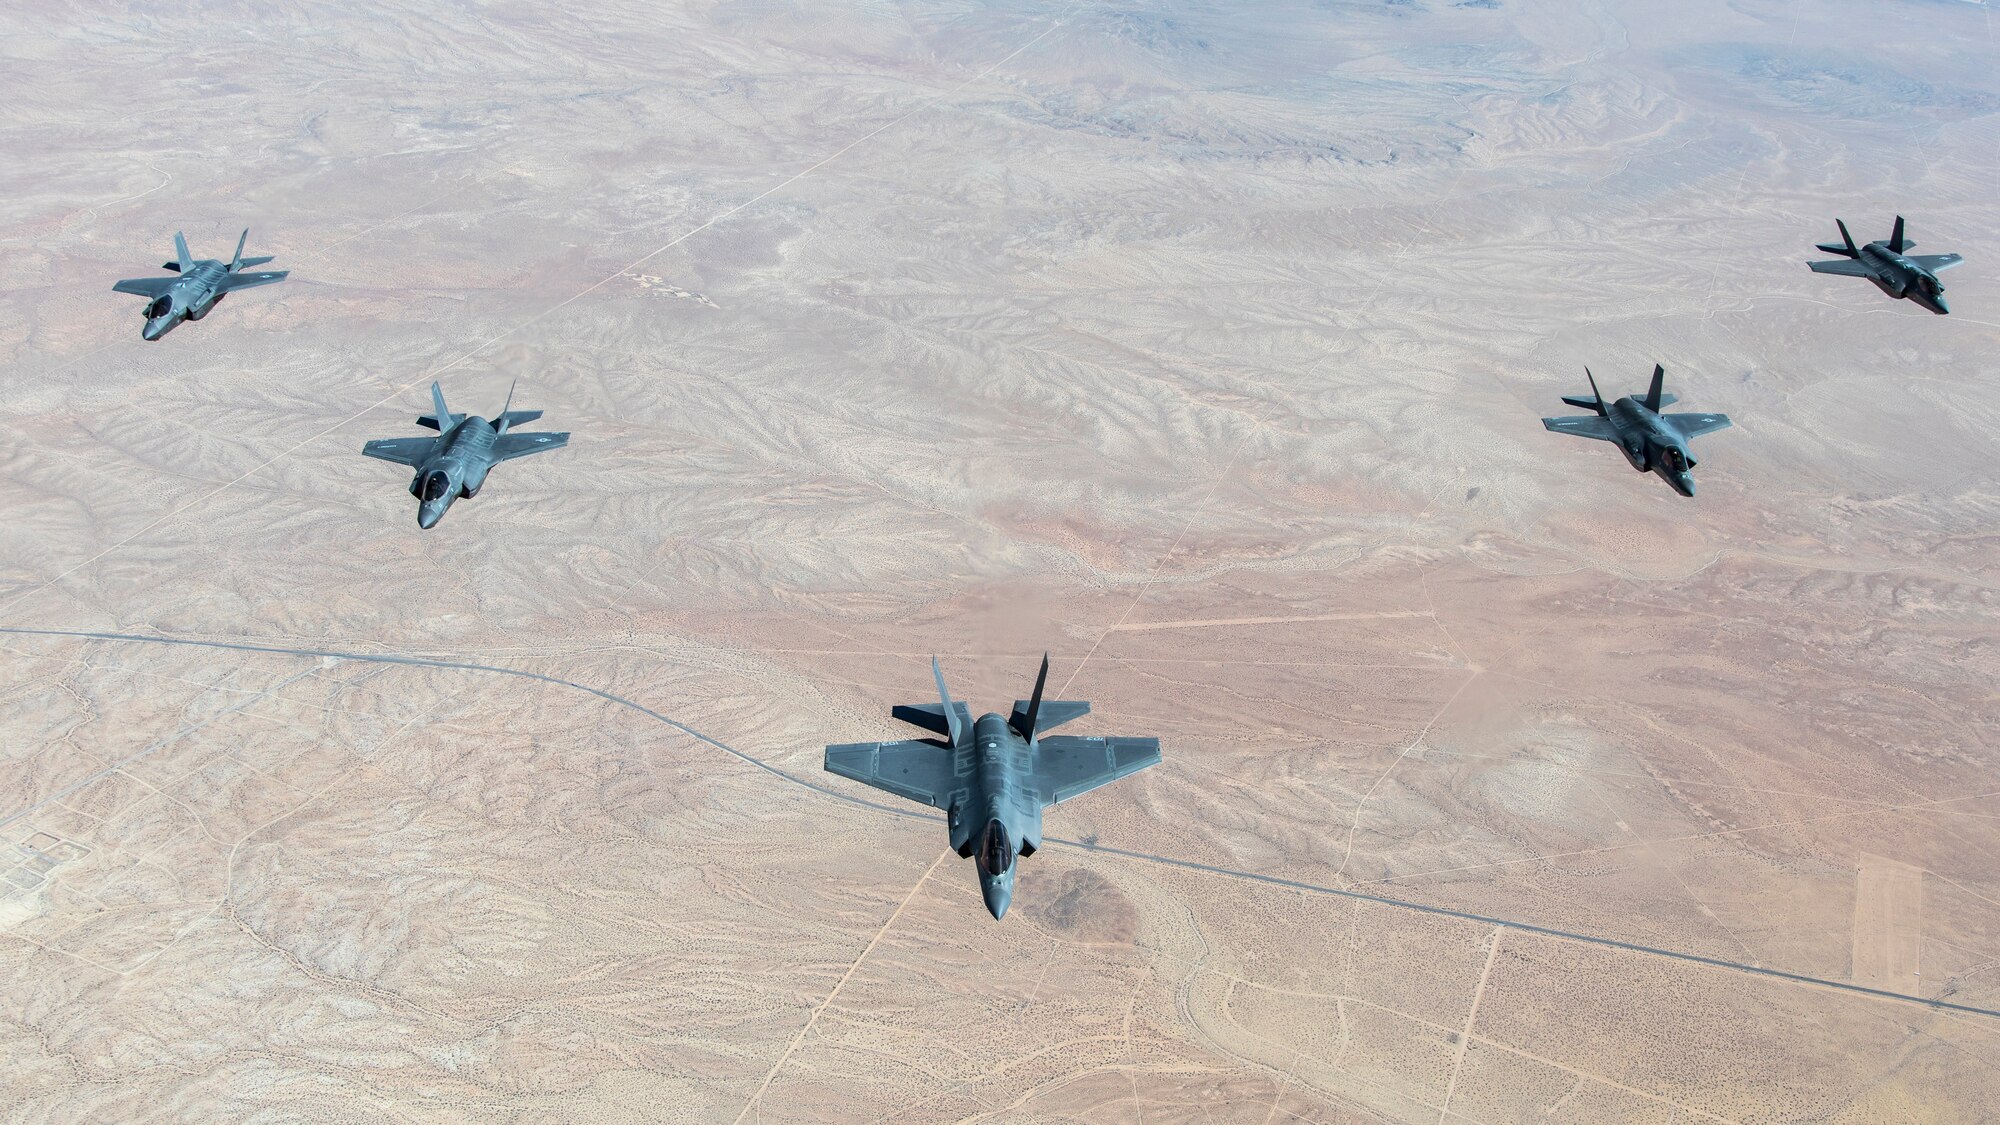 A formation flight of F-35 Lightning IIs over Edwards Air Force Base, California. The 31st Test and Evaluation Squadron recently completed its initial operational test and evaluation mission and six F-35s were reassigned to the 422nd Test and Evaluation Squadron at Nellis Air Force Base, Nevada. (Photo courtesy of Darin Russell, Lockheed Martin)